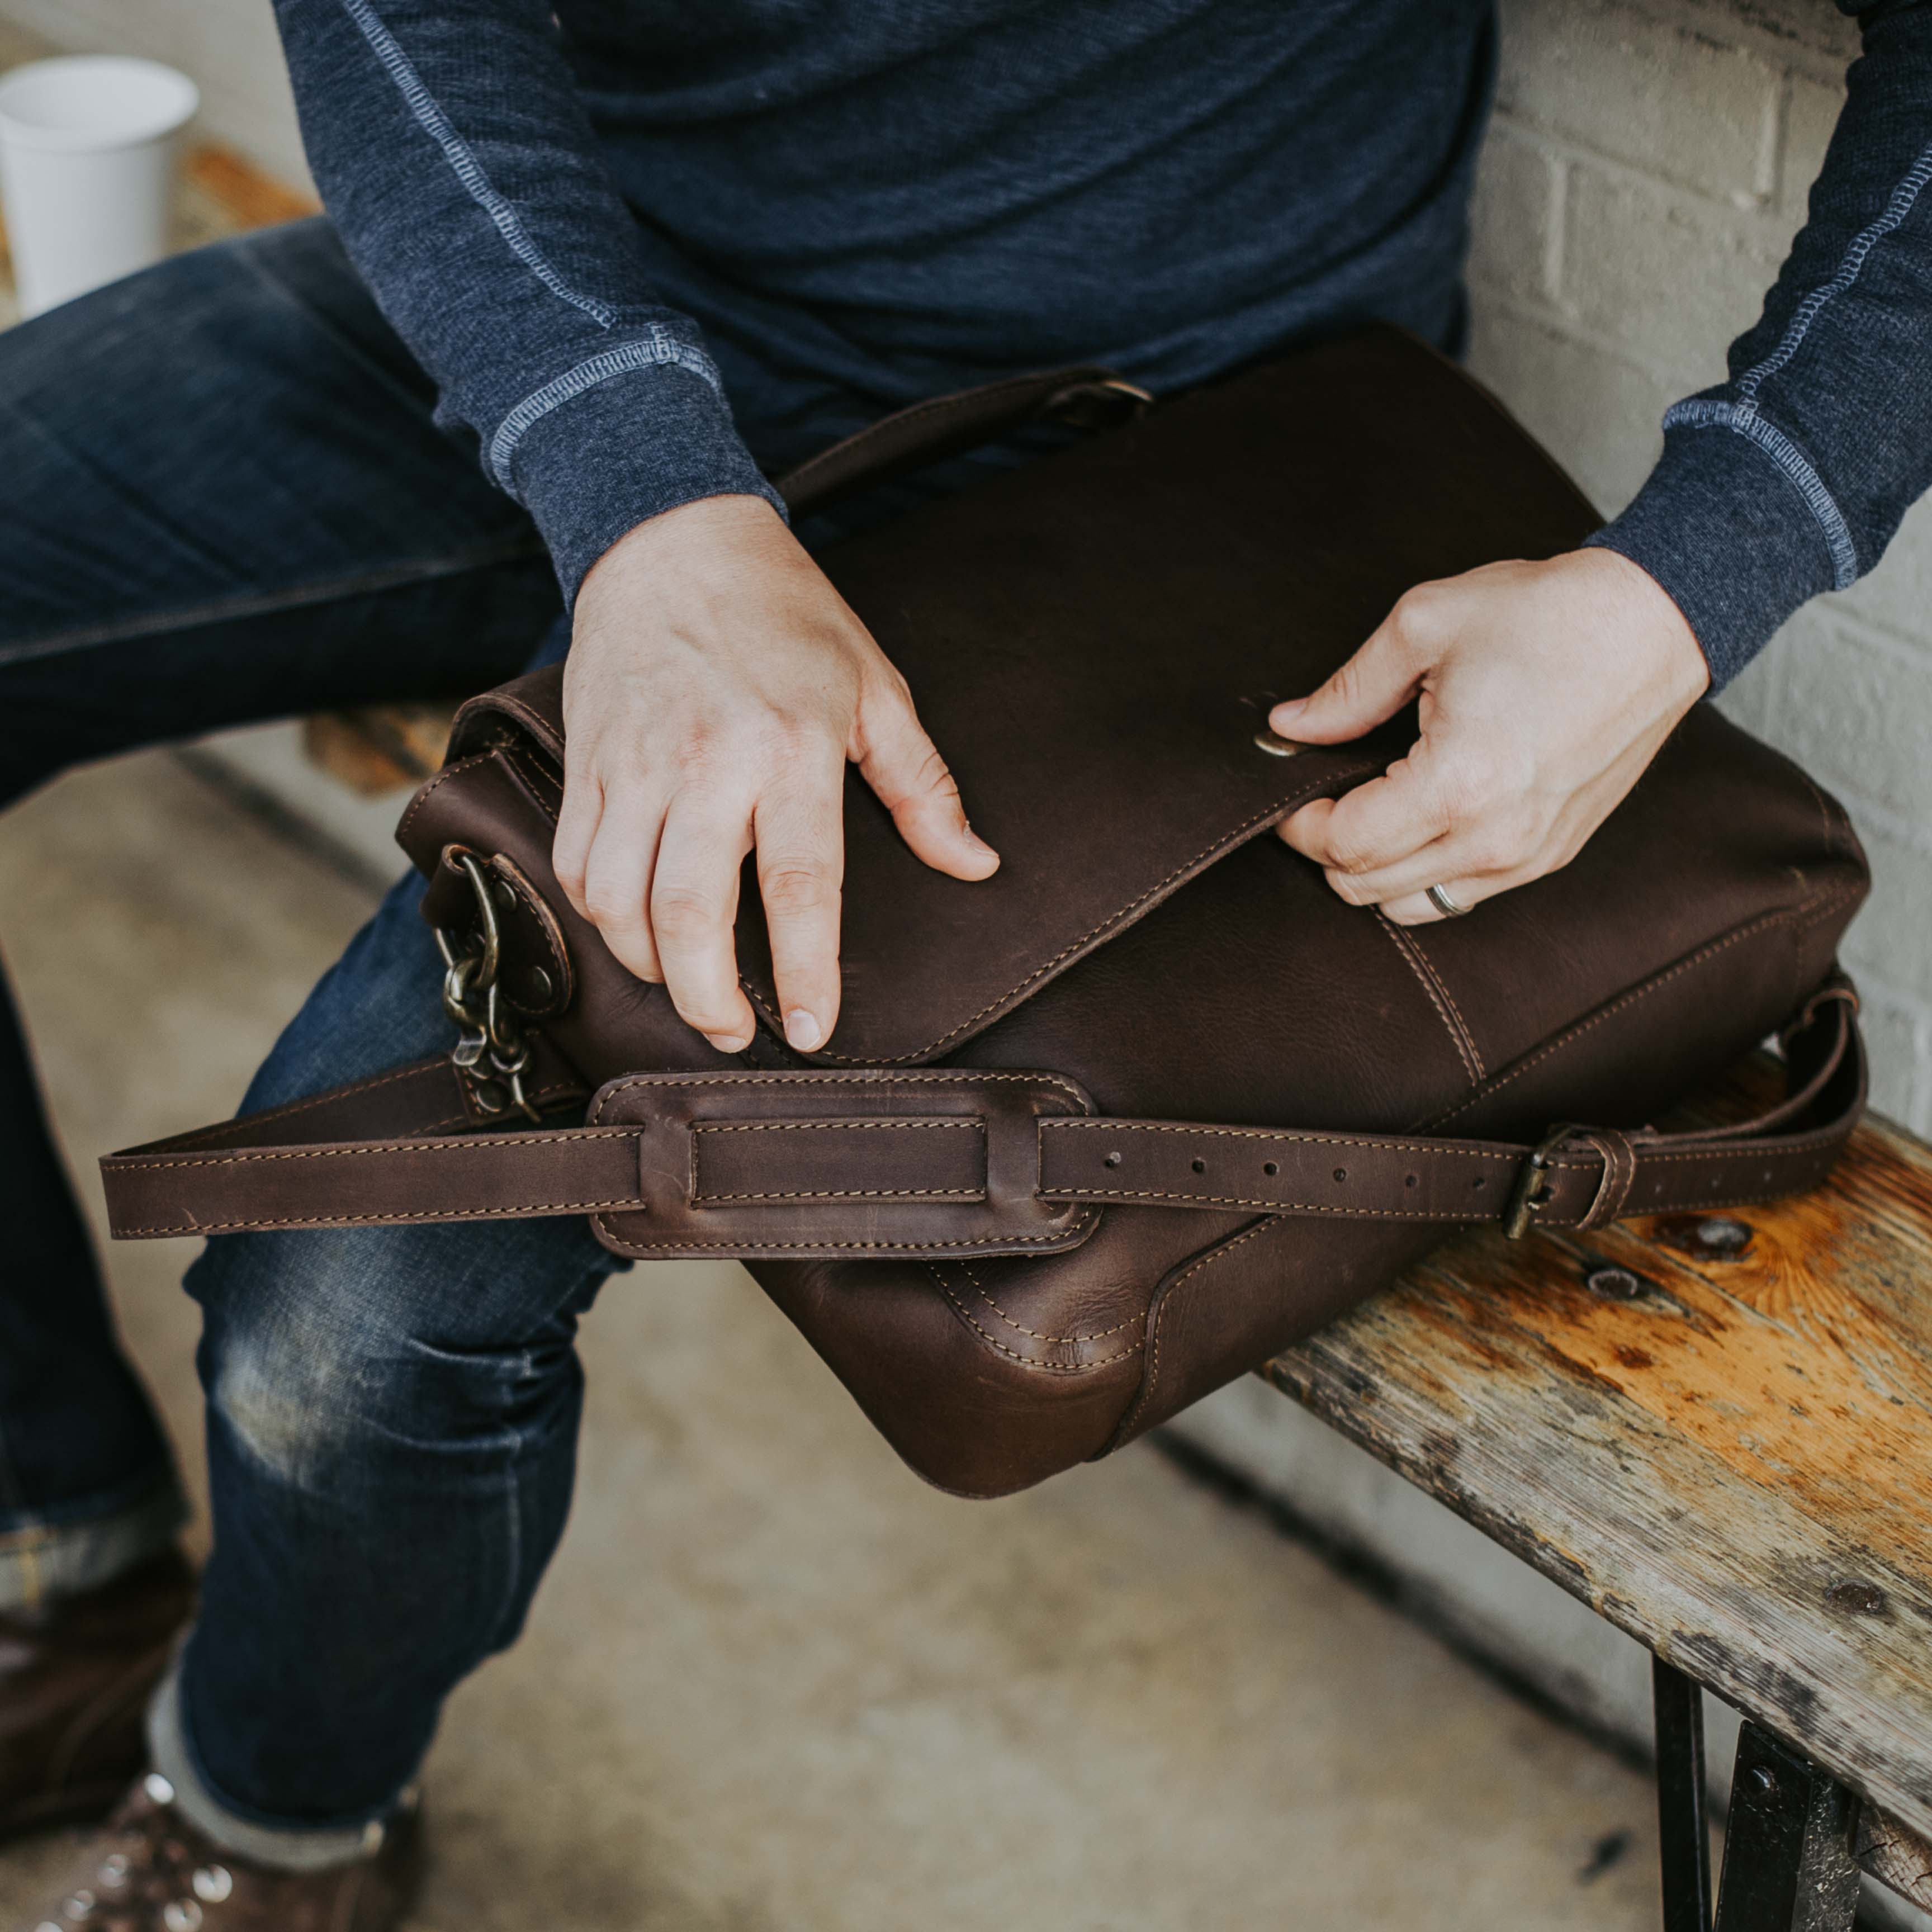 Men's Buffalo Leather Messenger Bag  Distressed Full Grain Laptop Bag –  The Real Leather Company